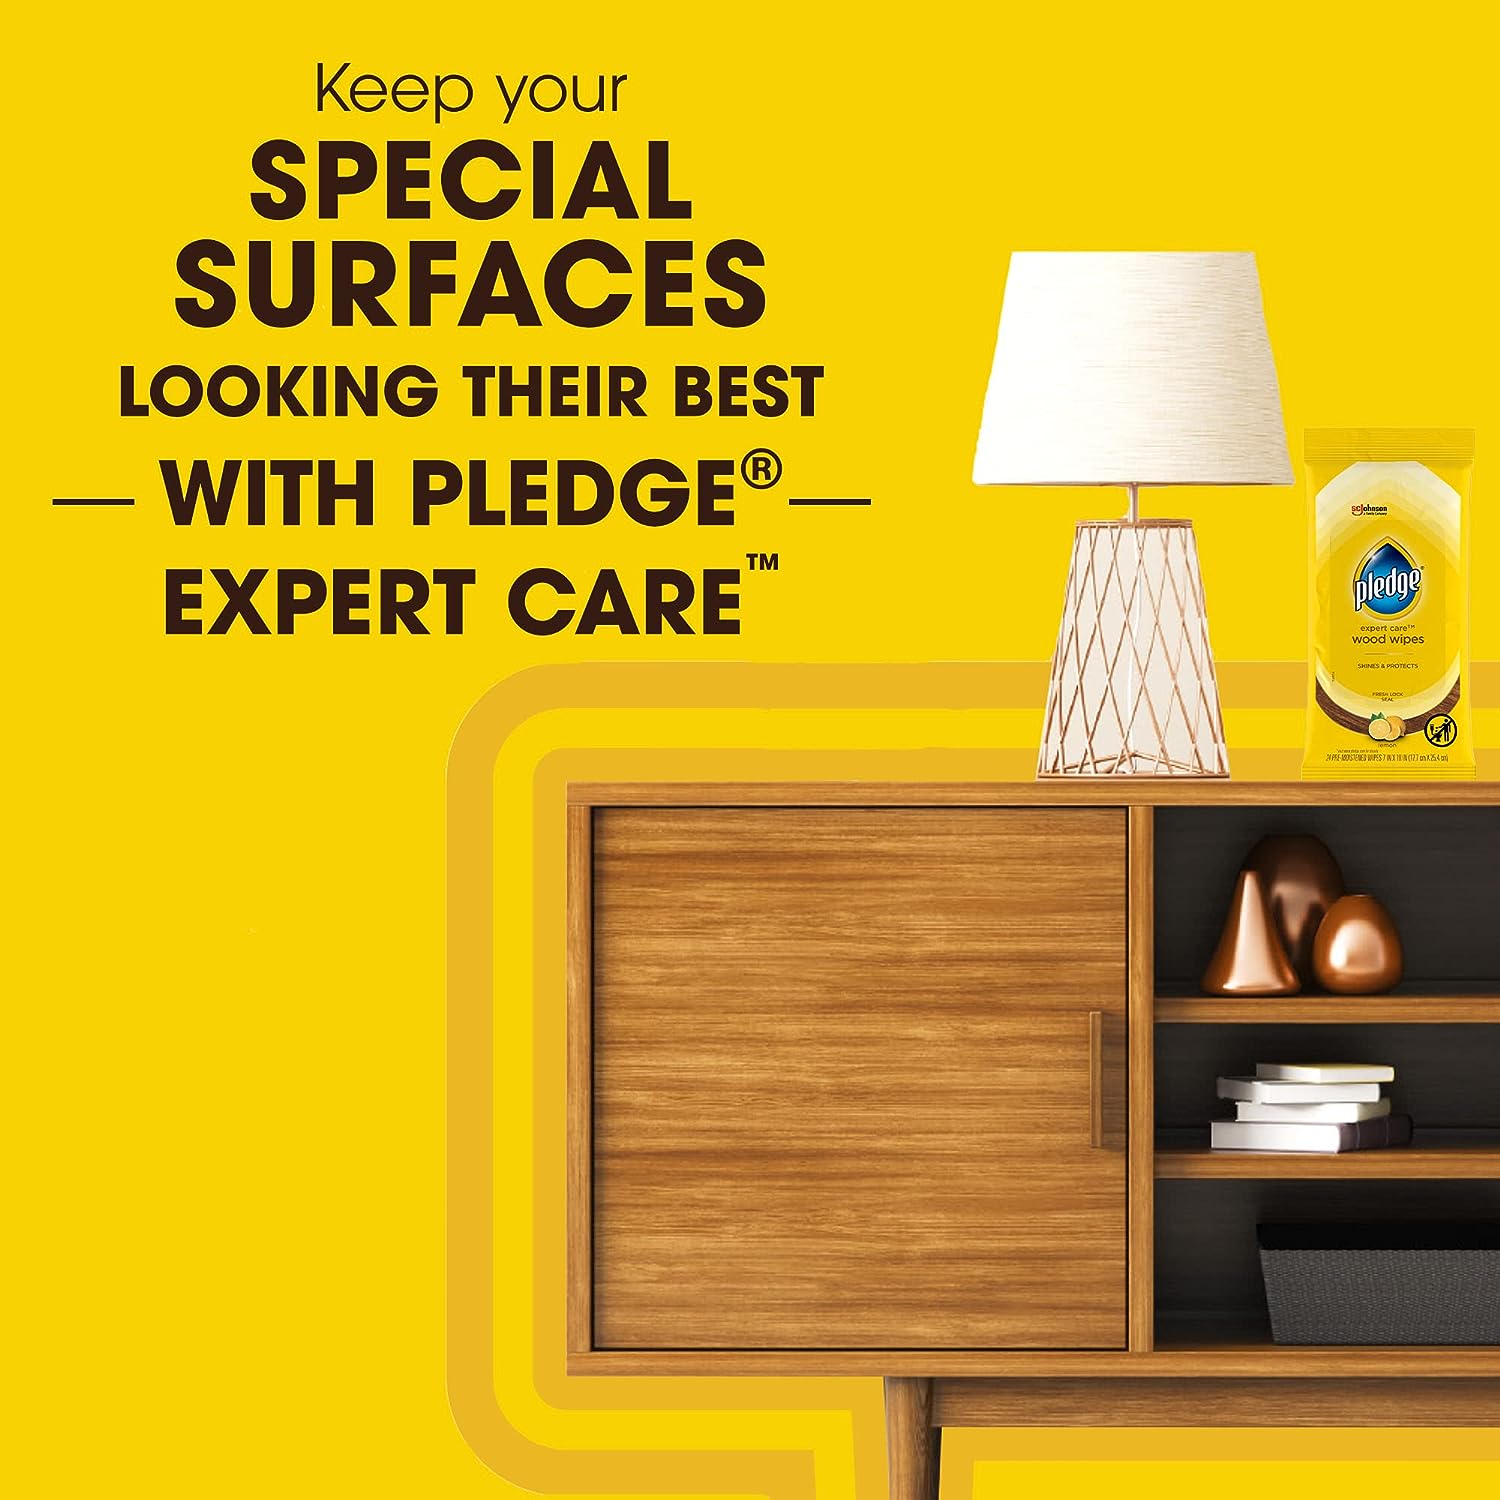 Pledge Multi-Surface Furniture Polish Wipes, Works on Wood, Granite, and Leather, Cleans and Protects, Lemon (24 Total Wipes) (Pack of 2) : Health & Household